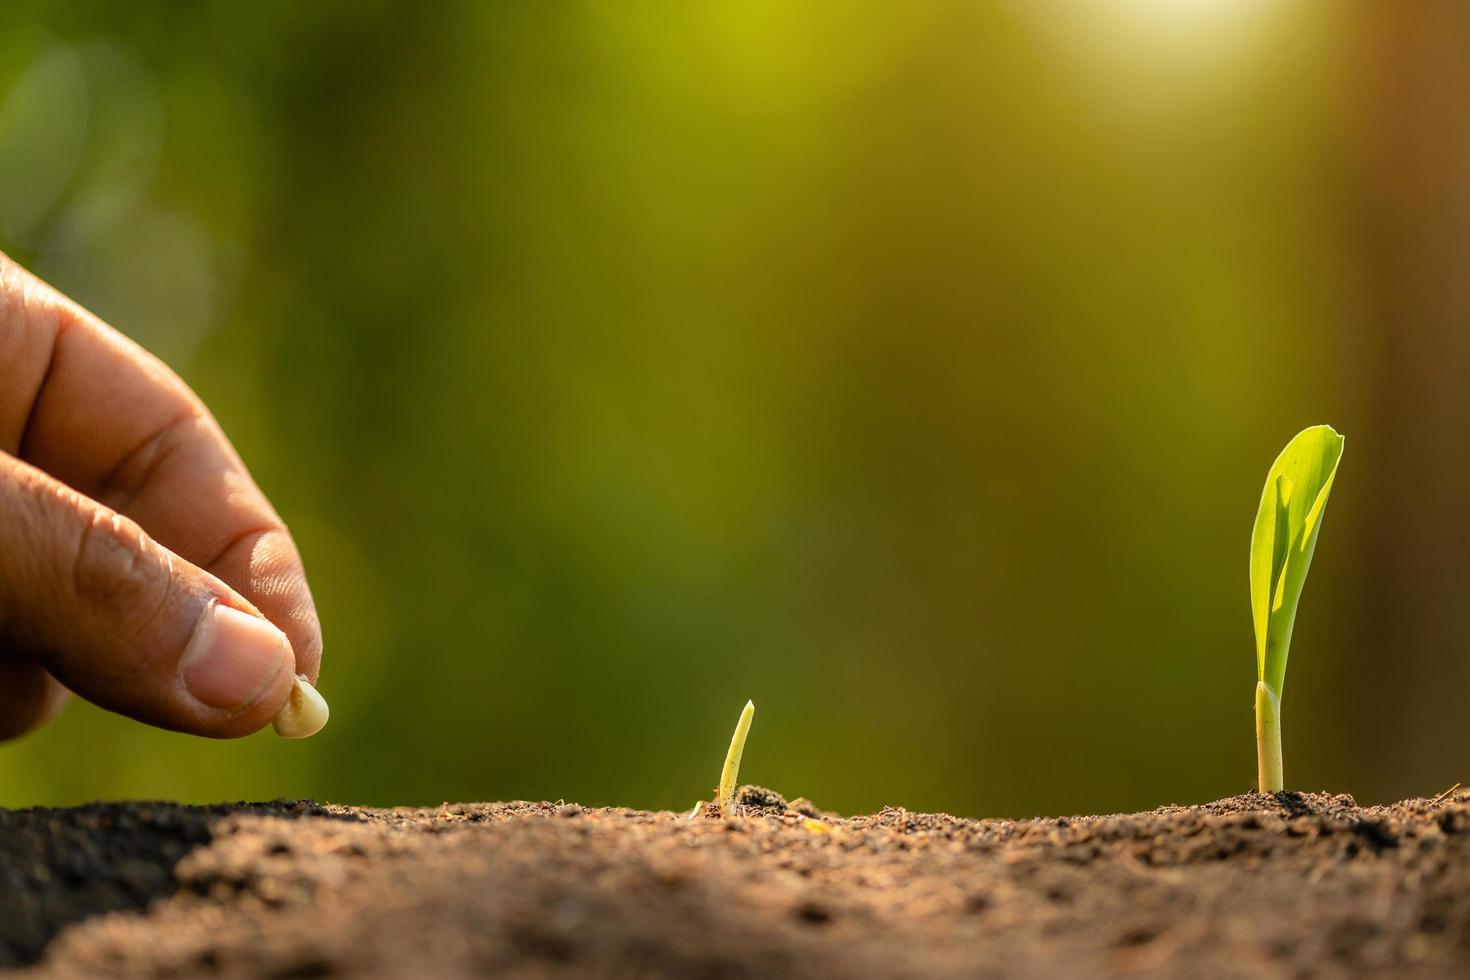 Farmer's hand planting seeds of corn tree in soil. Agriculture, Growing or environment concept photo